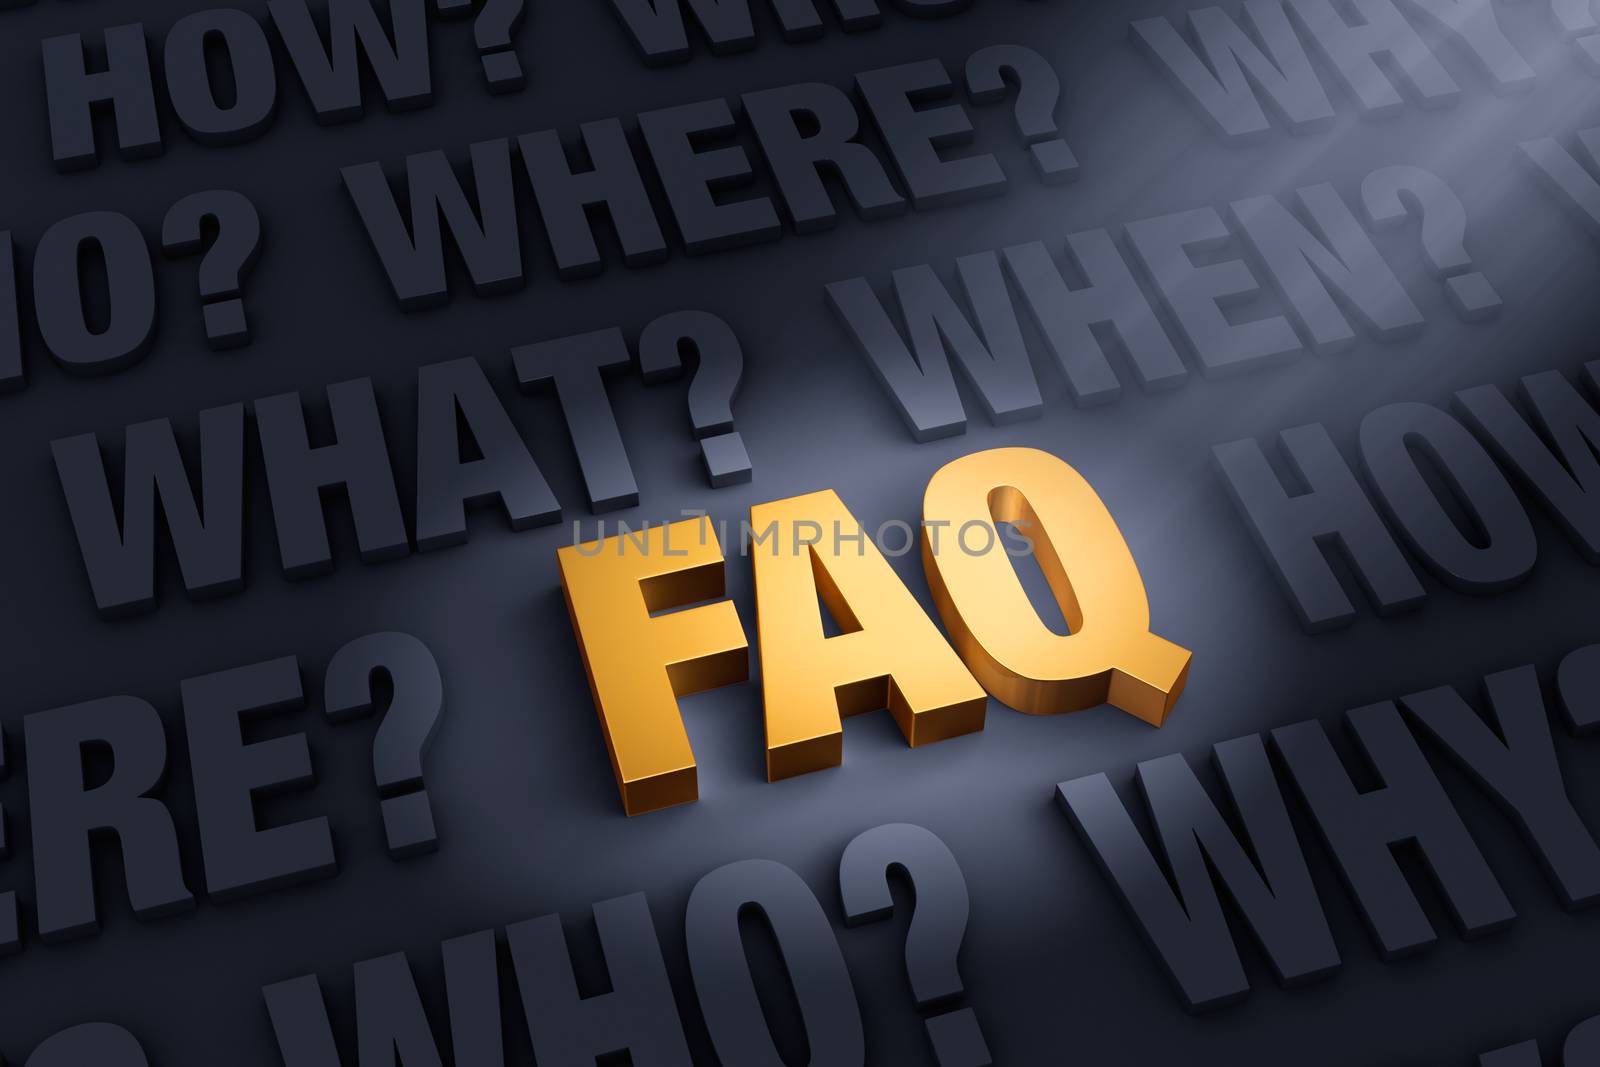 A spotlight illuminates a bright, gold "FAQ" a dark background filled with "WHO?", "WHAT?", "WHEN?", "WHERE", "HOW?", and "WHY?" 